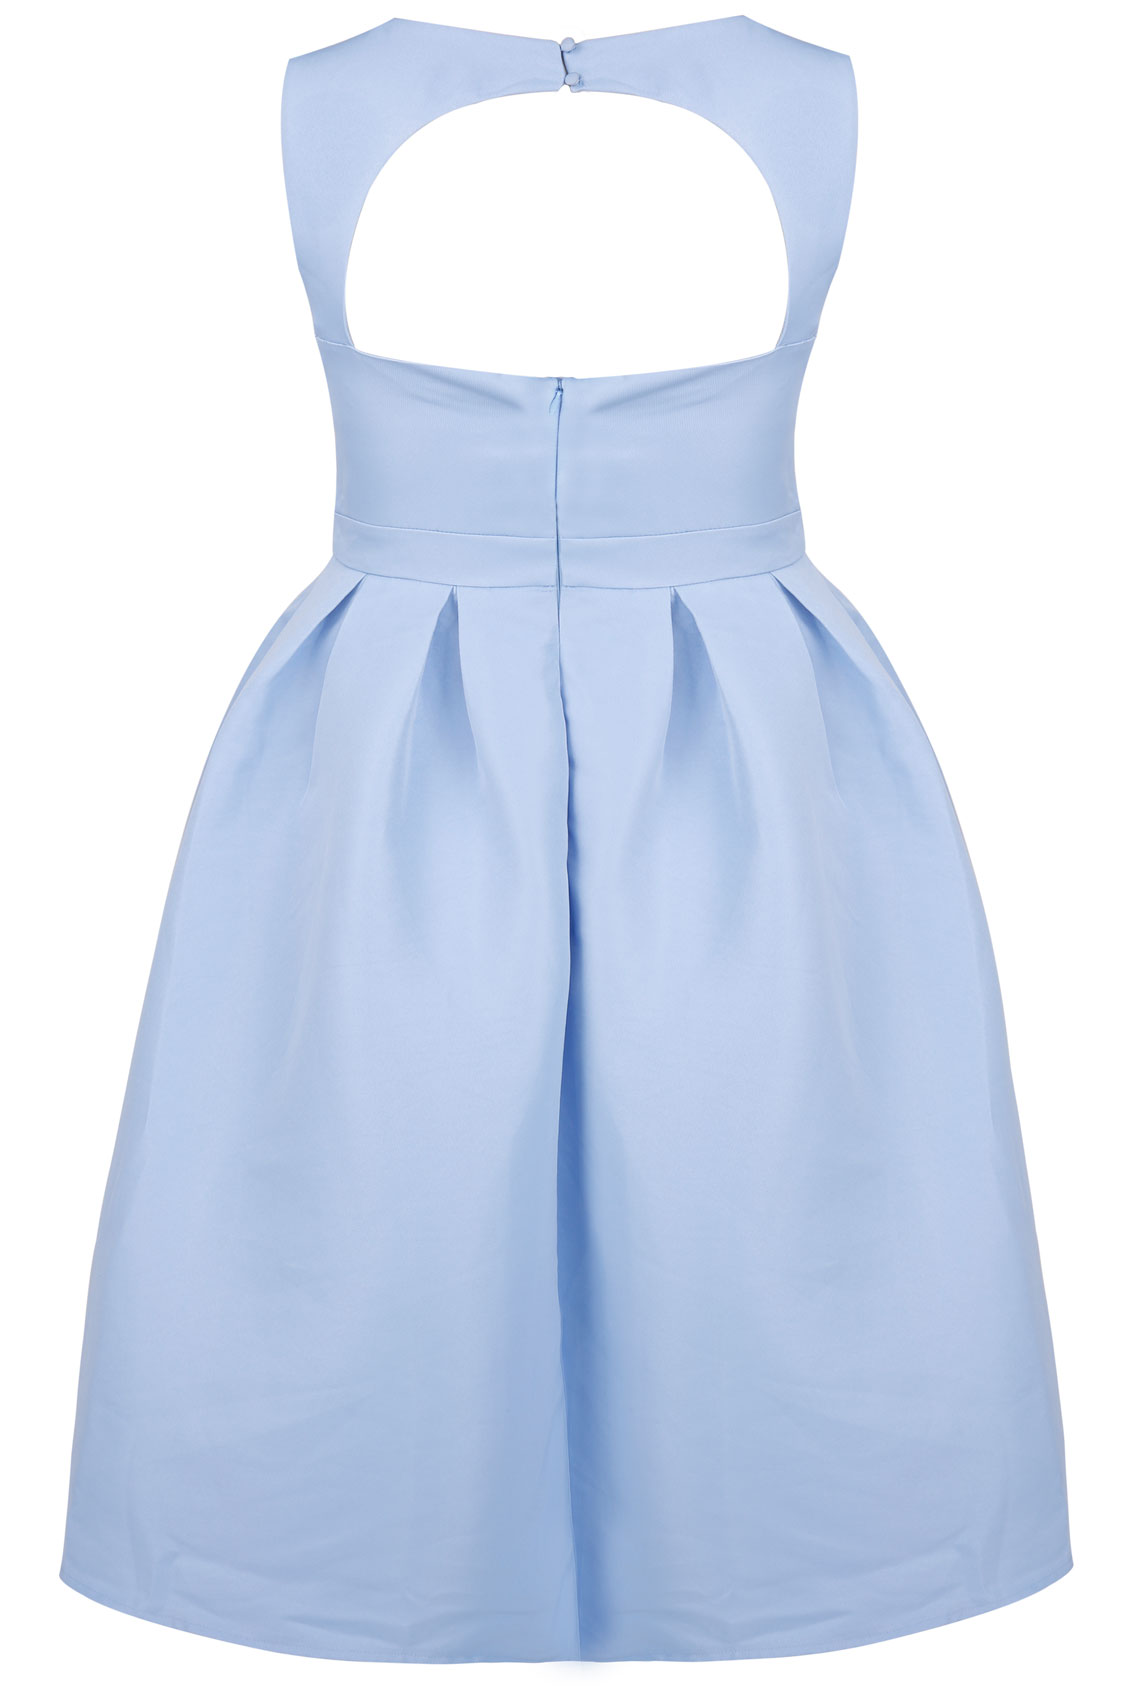 CHI CHI LONDON Pale Blue Flared Prom Dress With Cut Out Back Plus Size ...